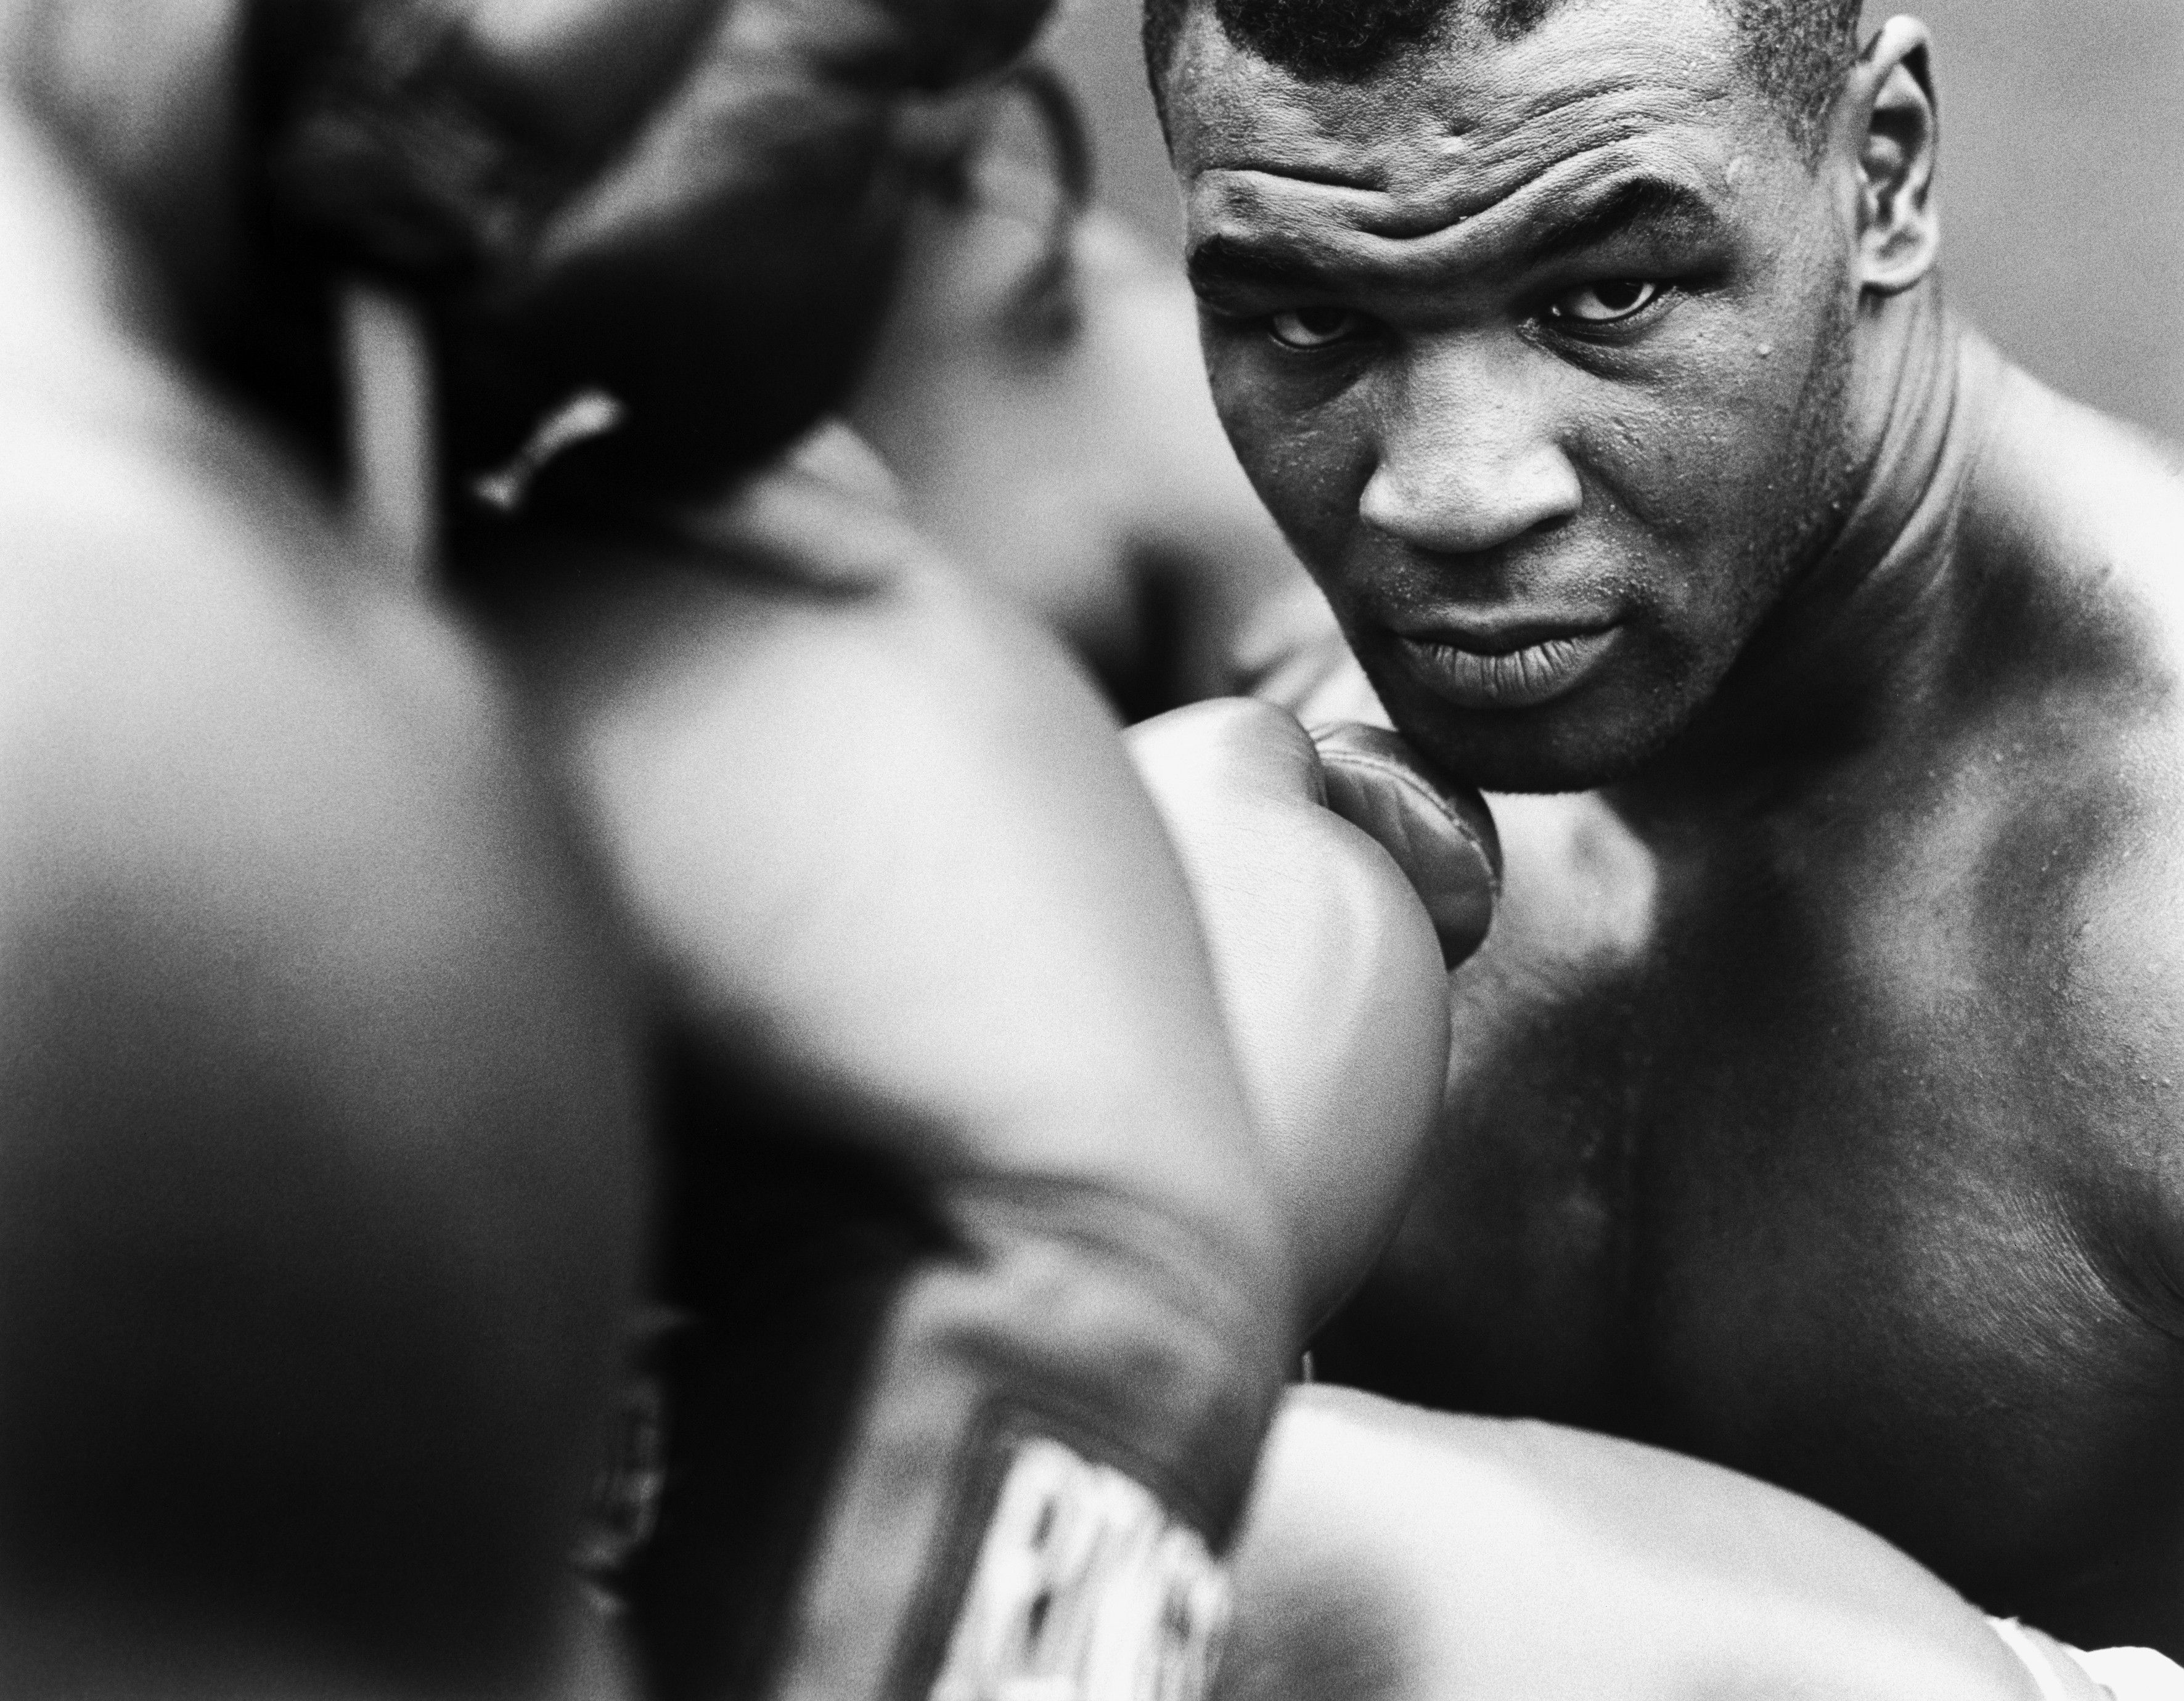 Download Wallpaper, Download 3543x2760 black and white gloves stare boxing mike tyson knockout People HD Wallpaper, Hi Res People Wallpaper, High Definition Wallpaper